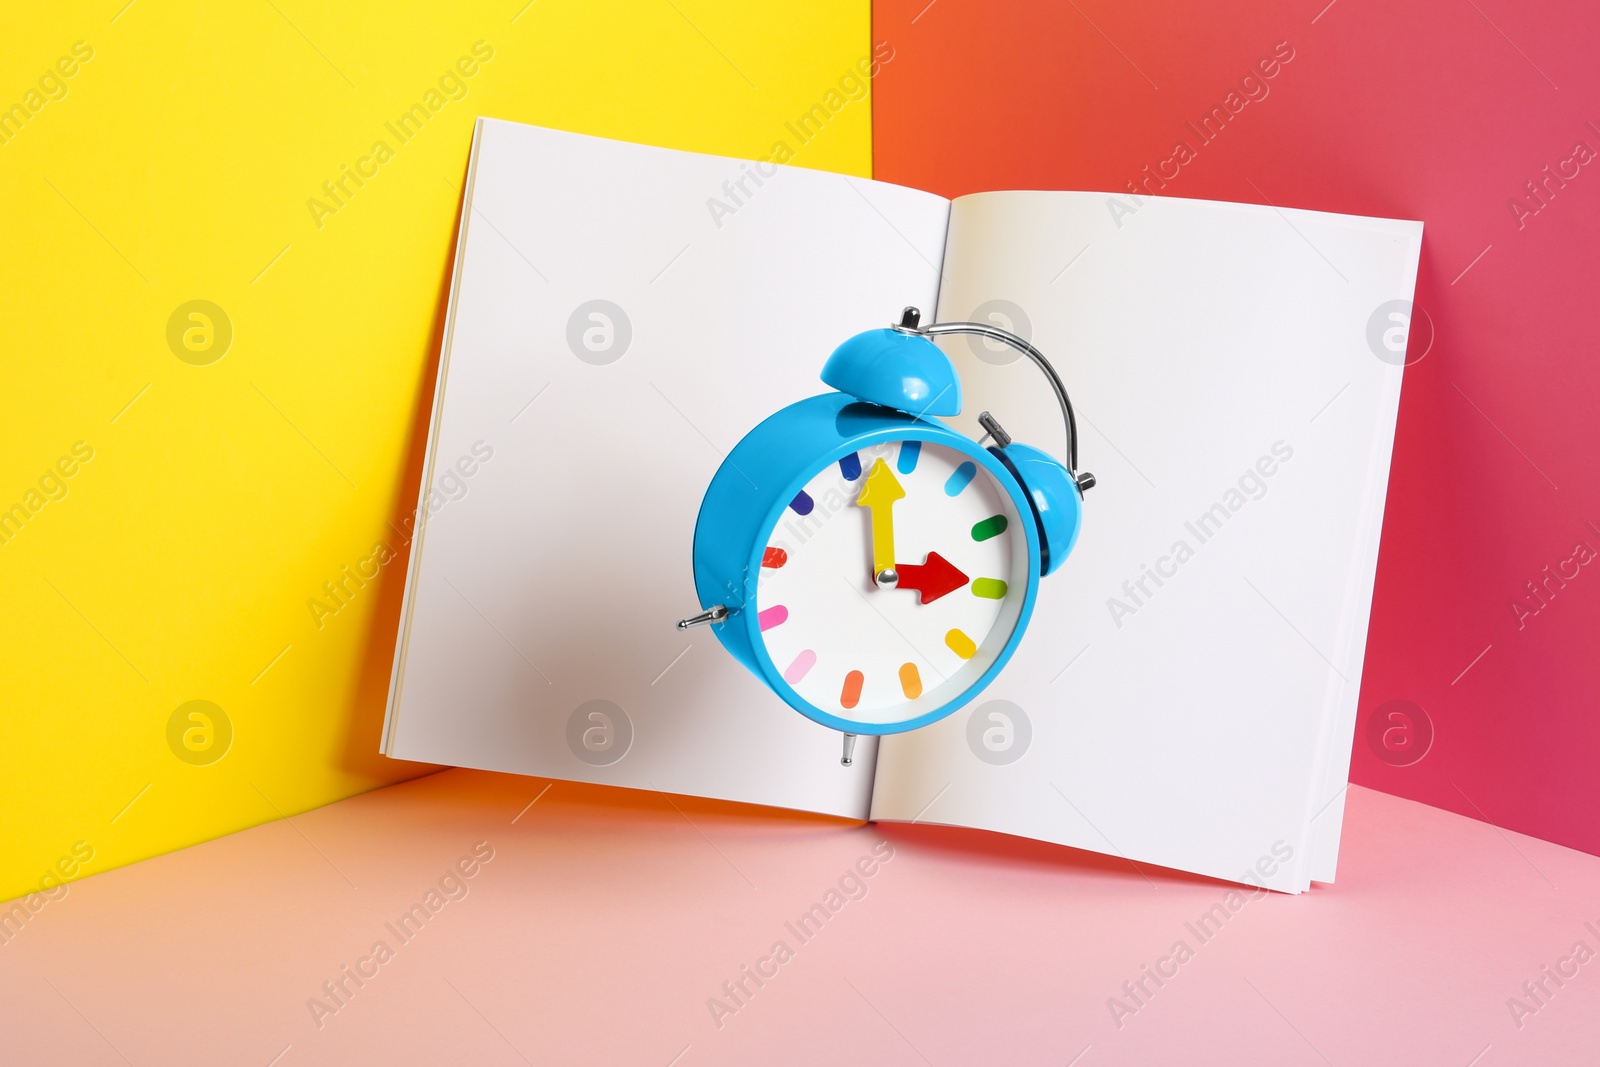 Photo of Alarm clock and empty book pages on color background. Mockup for design